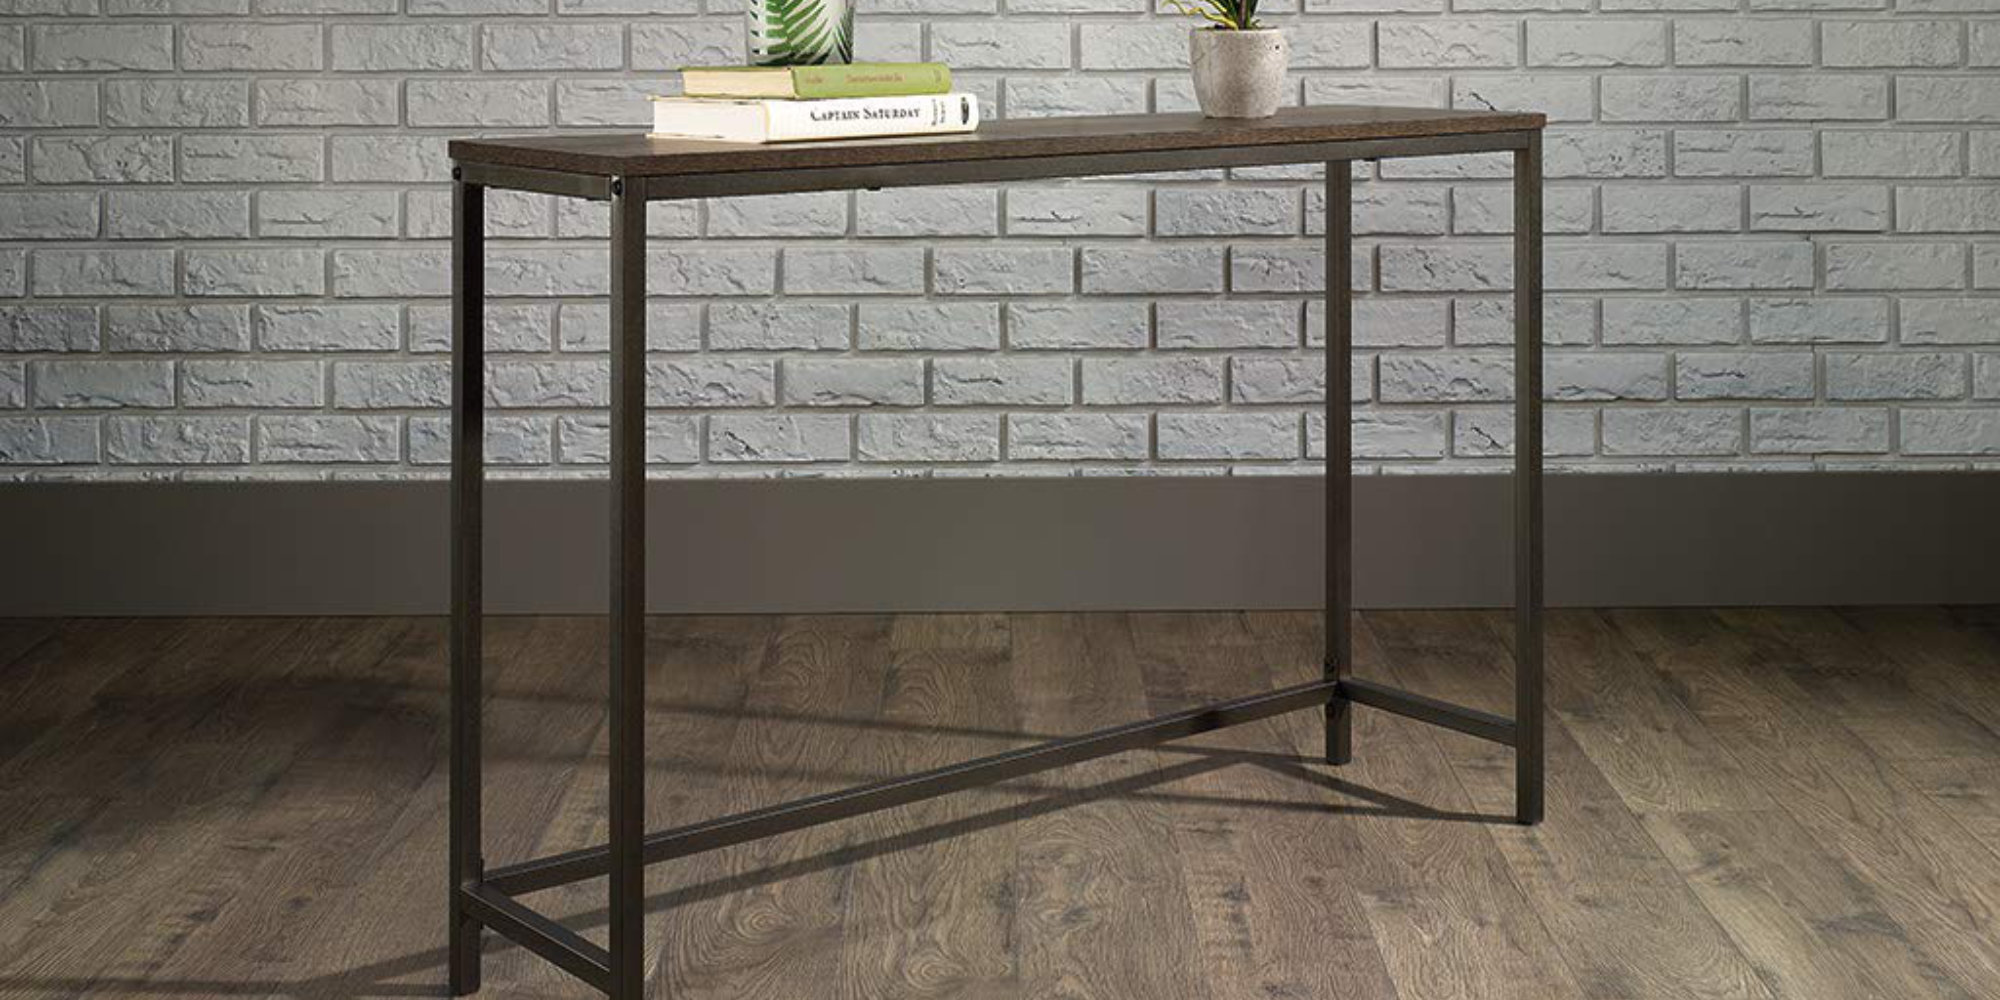 Sauder's North Ave. Sofa Table is a great desk for cozy